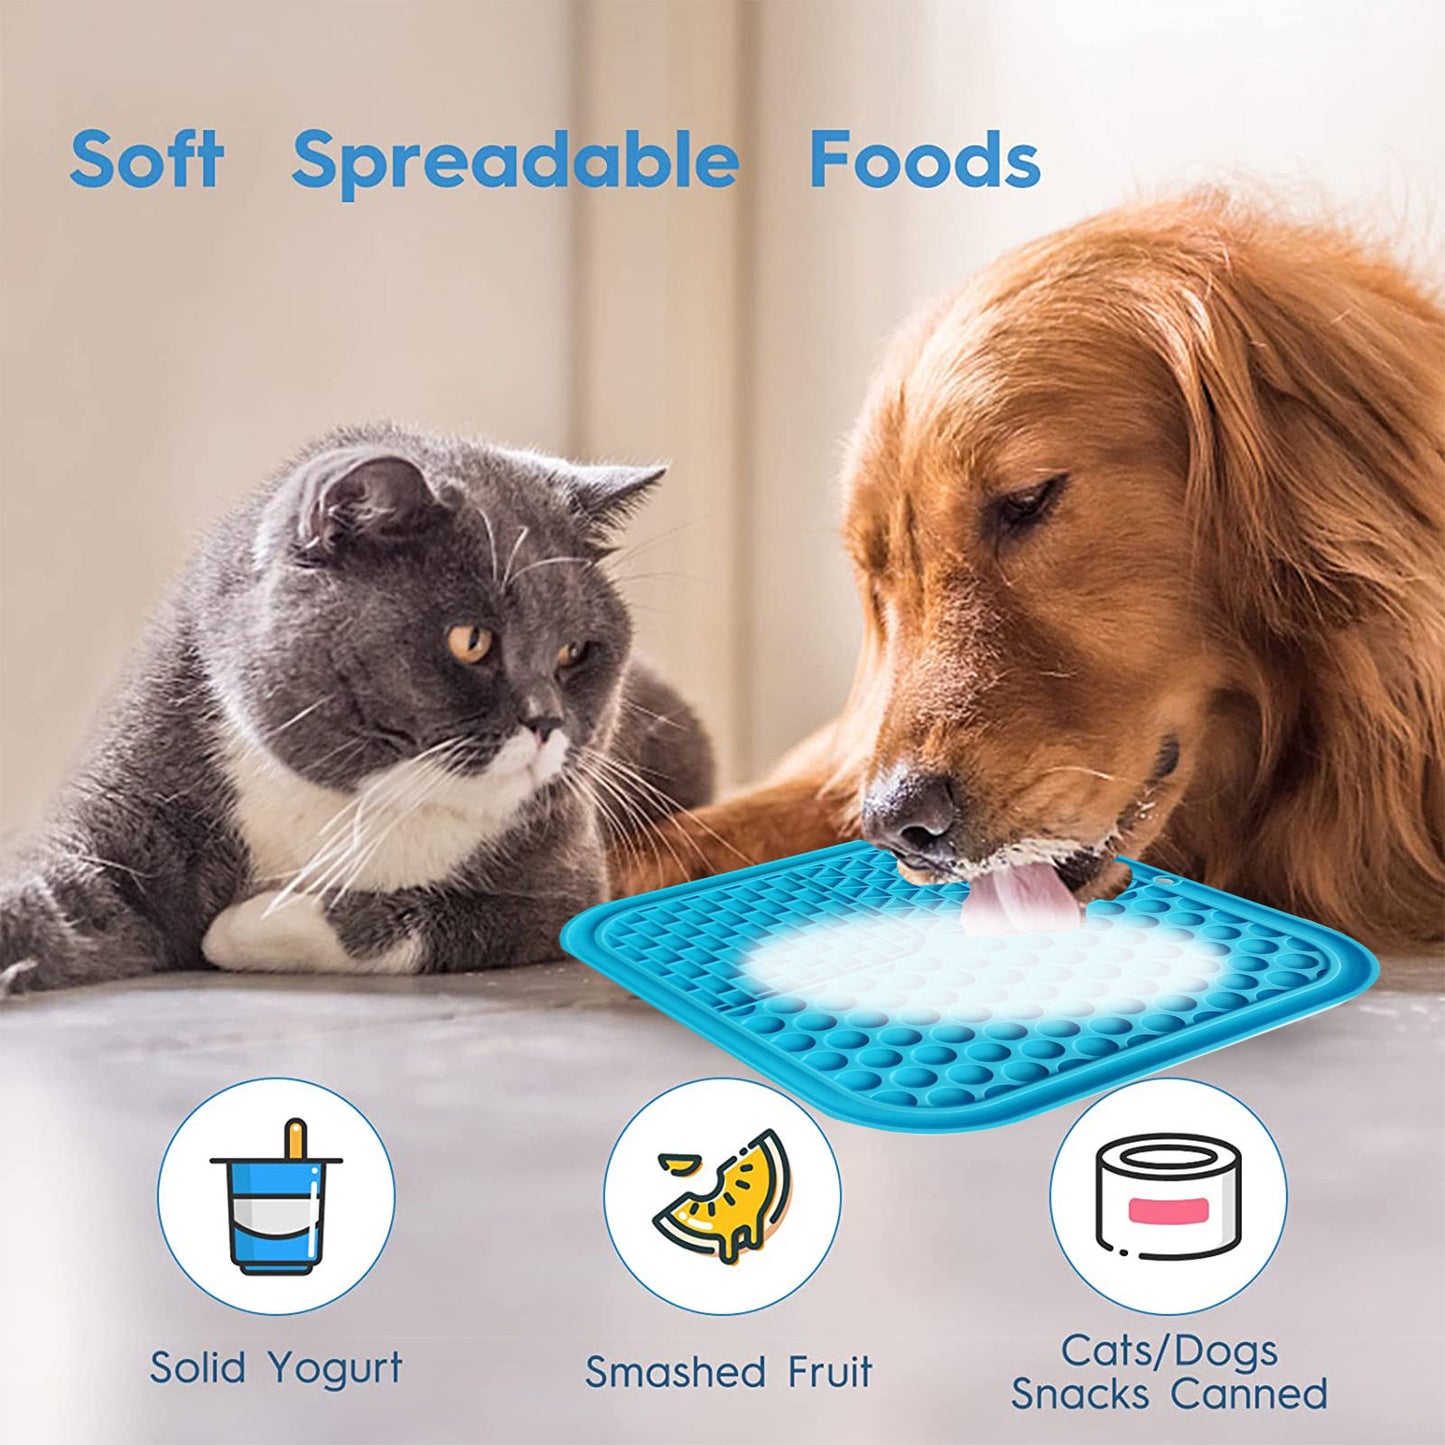 Pawfriends 3in1 Silicone Pet Lick Mat Cat Puppy Dog Slow Feeder Grooming Helper Mat Blue